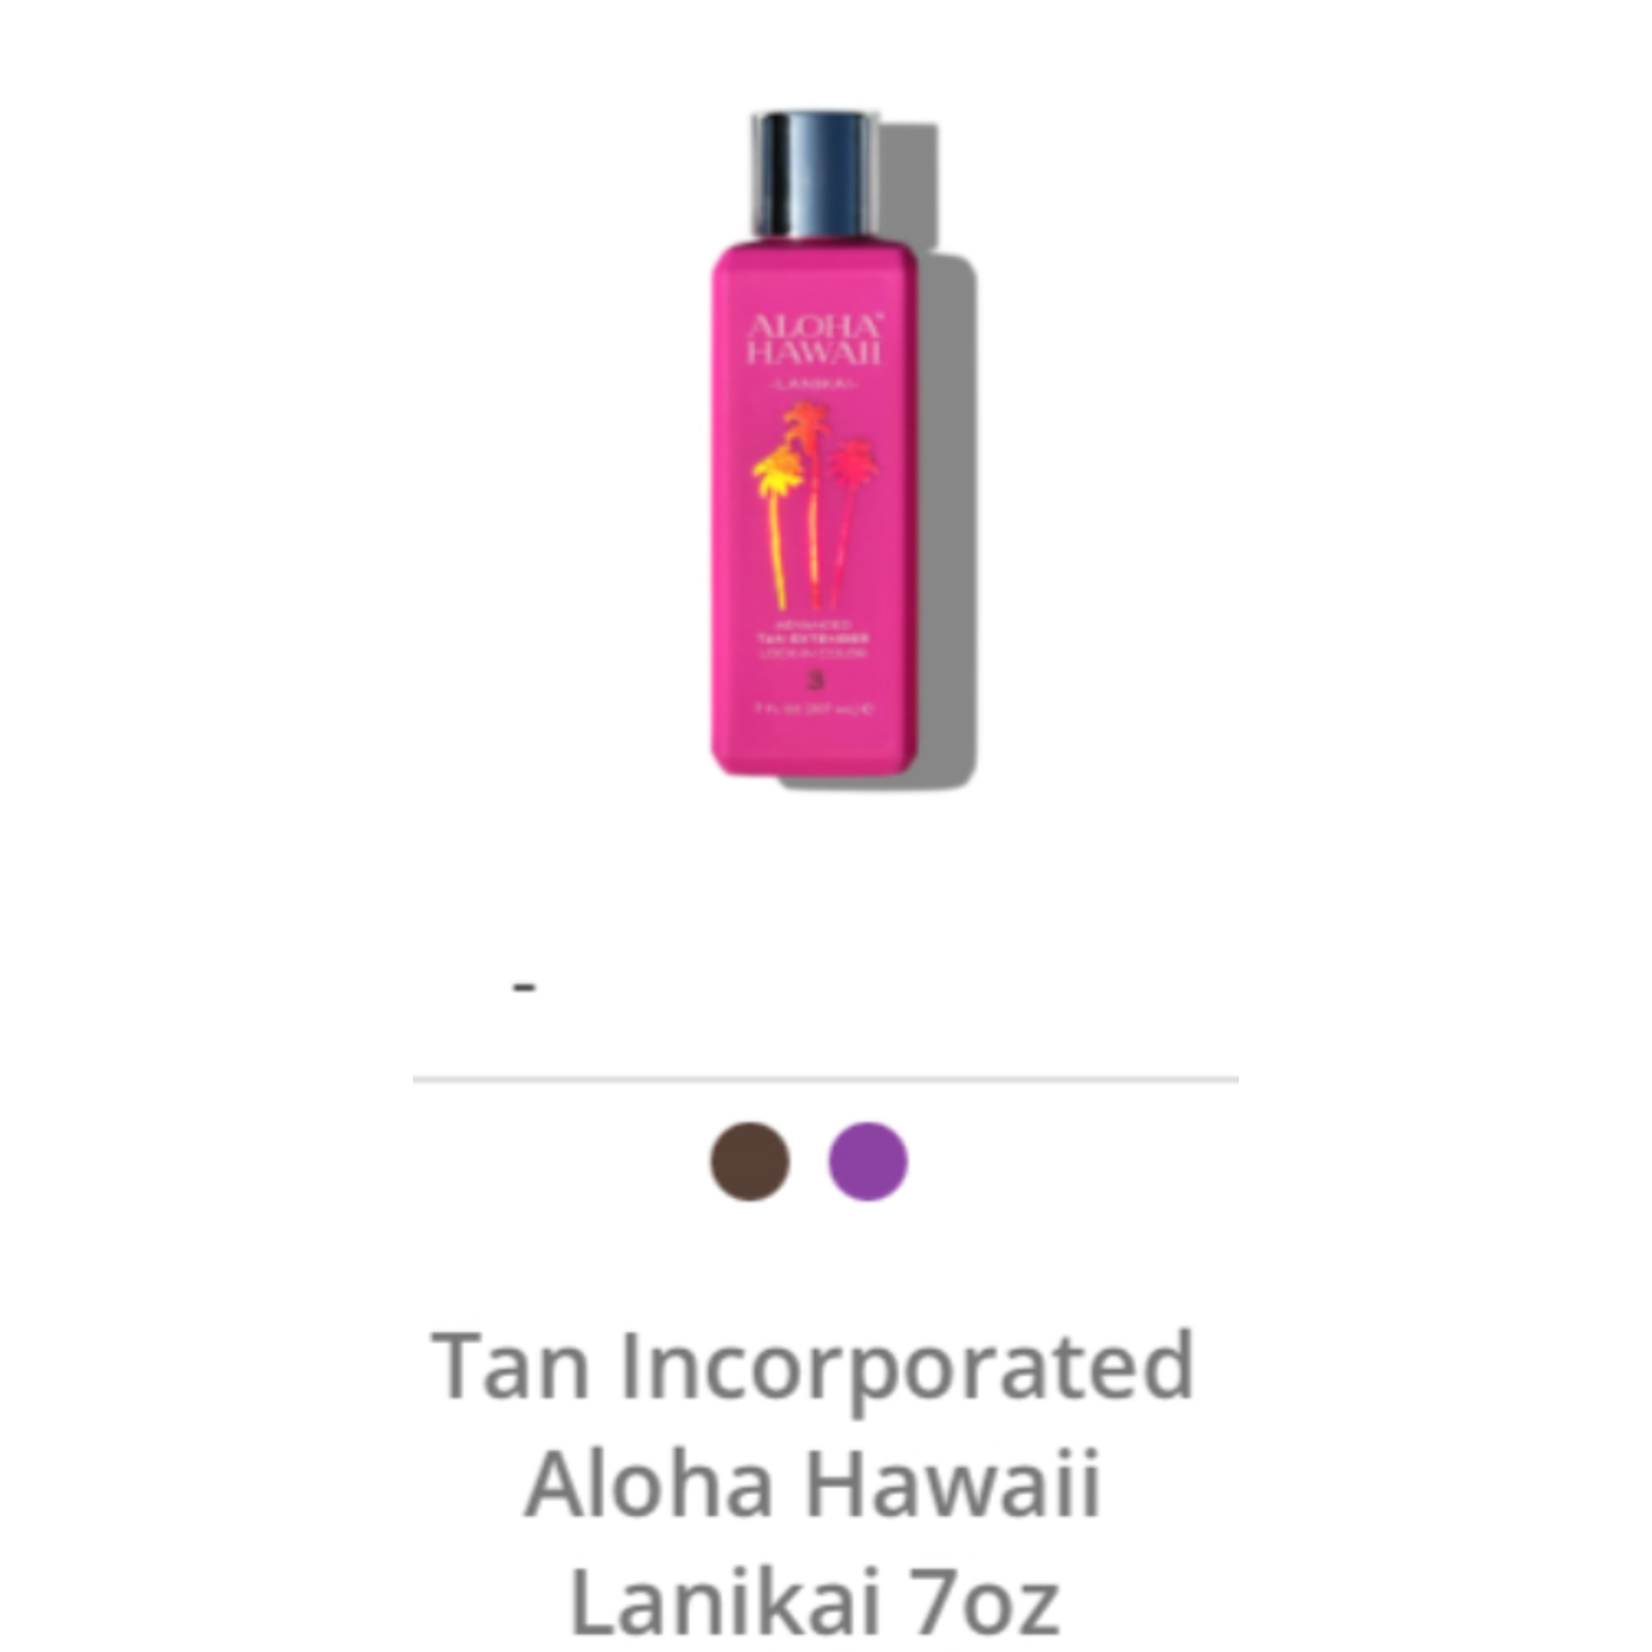 TAN INCORPORATED ALOHA HAWAII BOX 3 STEP TOTAL TANNING SYSTEM